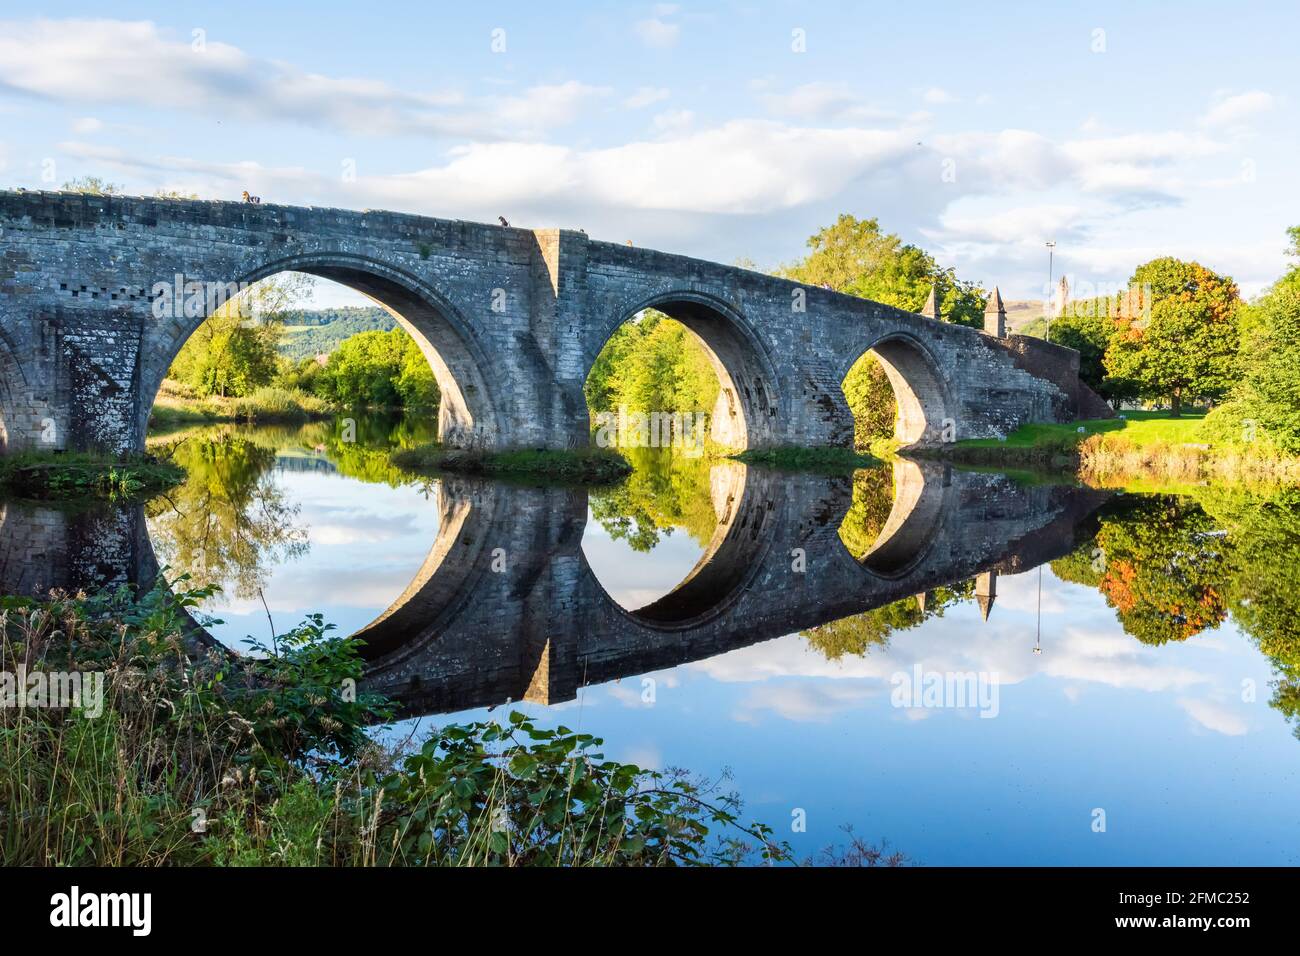 Old Stirling Bridge spanning the River Forth in Scotland. The medieval bridge dates from the 15th century. Stock Photo